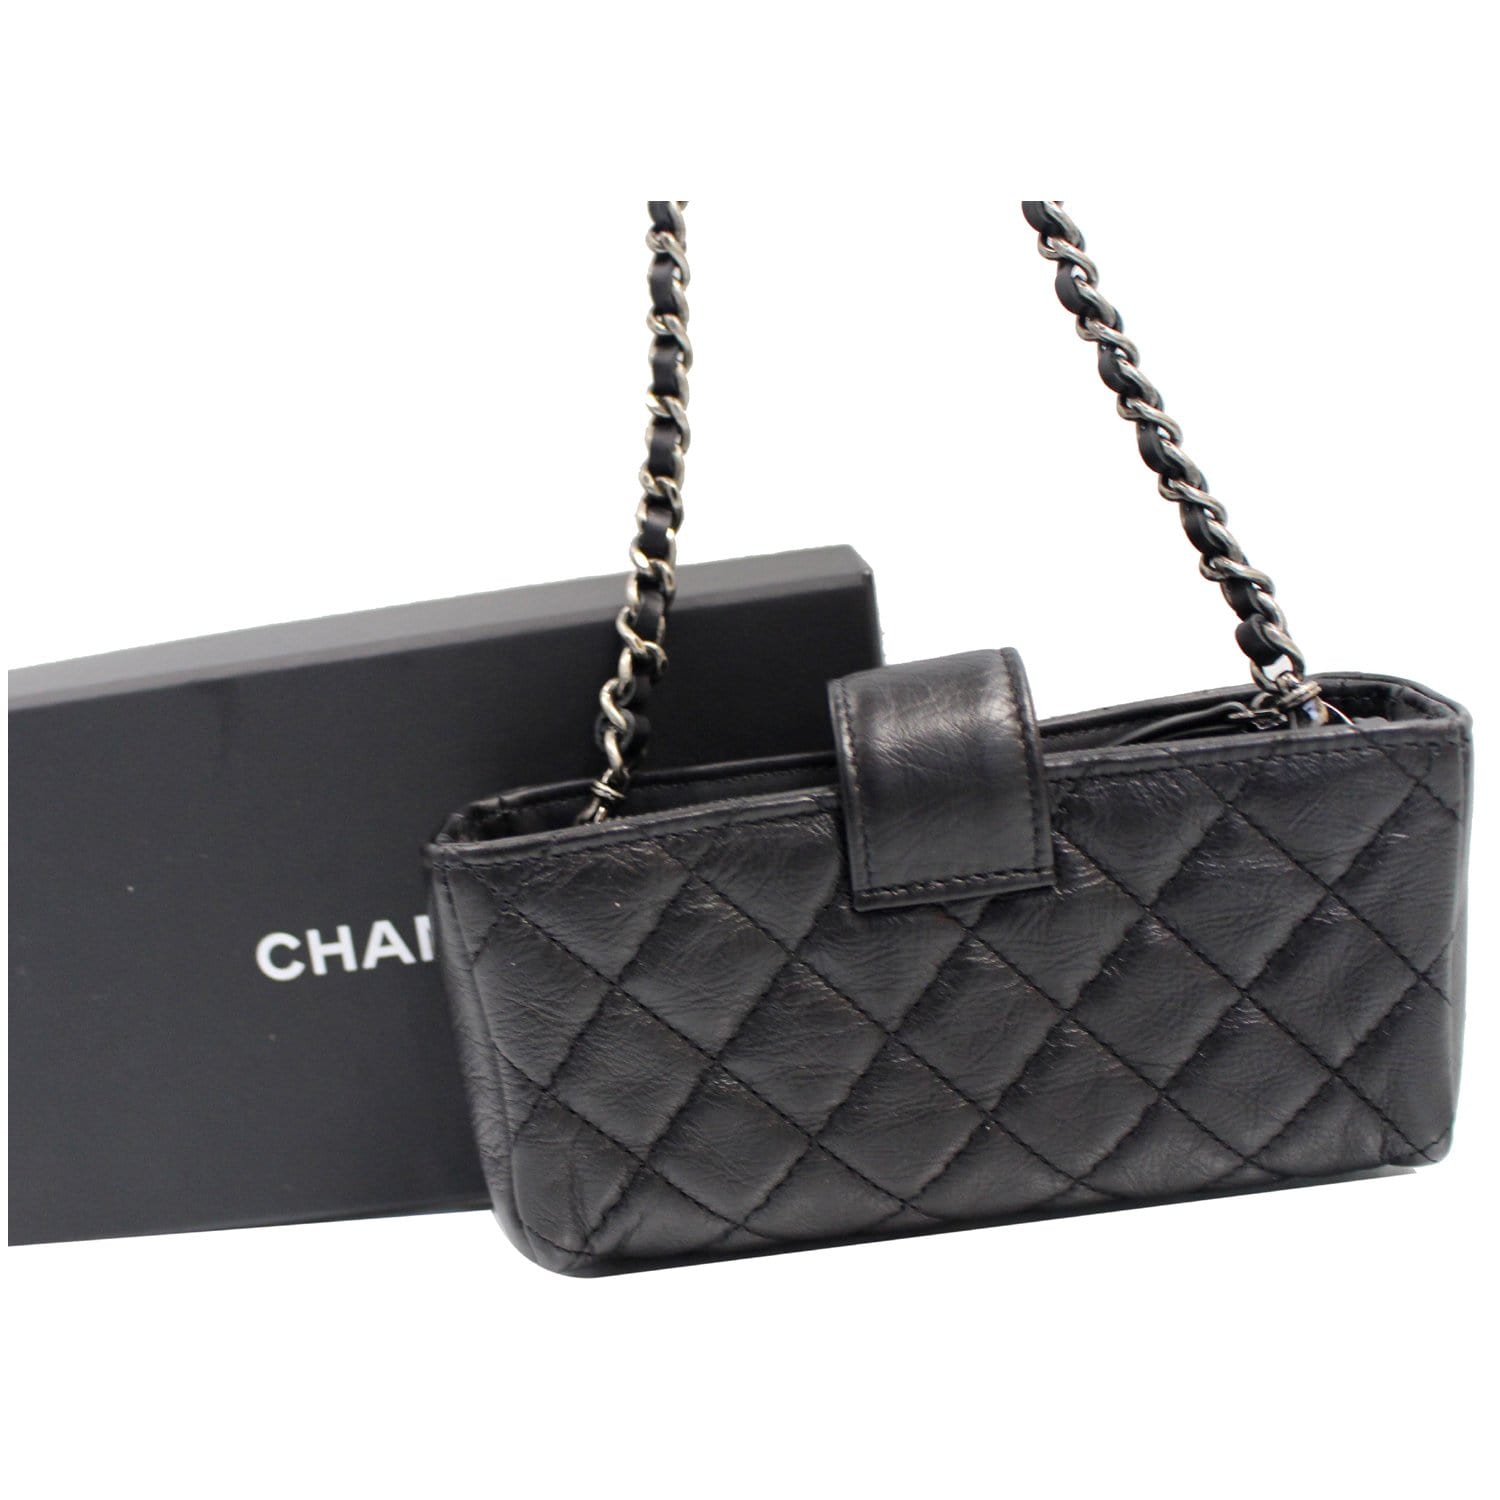 Chanel Reissue Lucky Charm Quilted Leather Bag Black